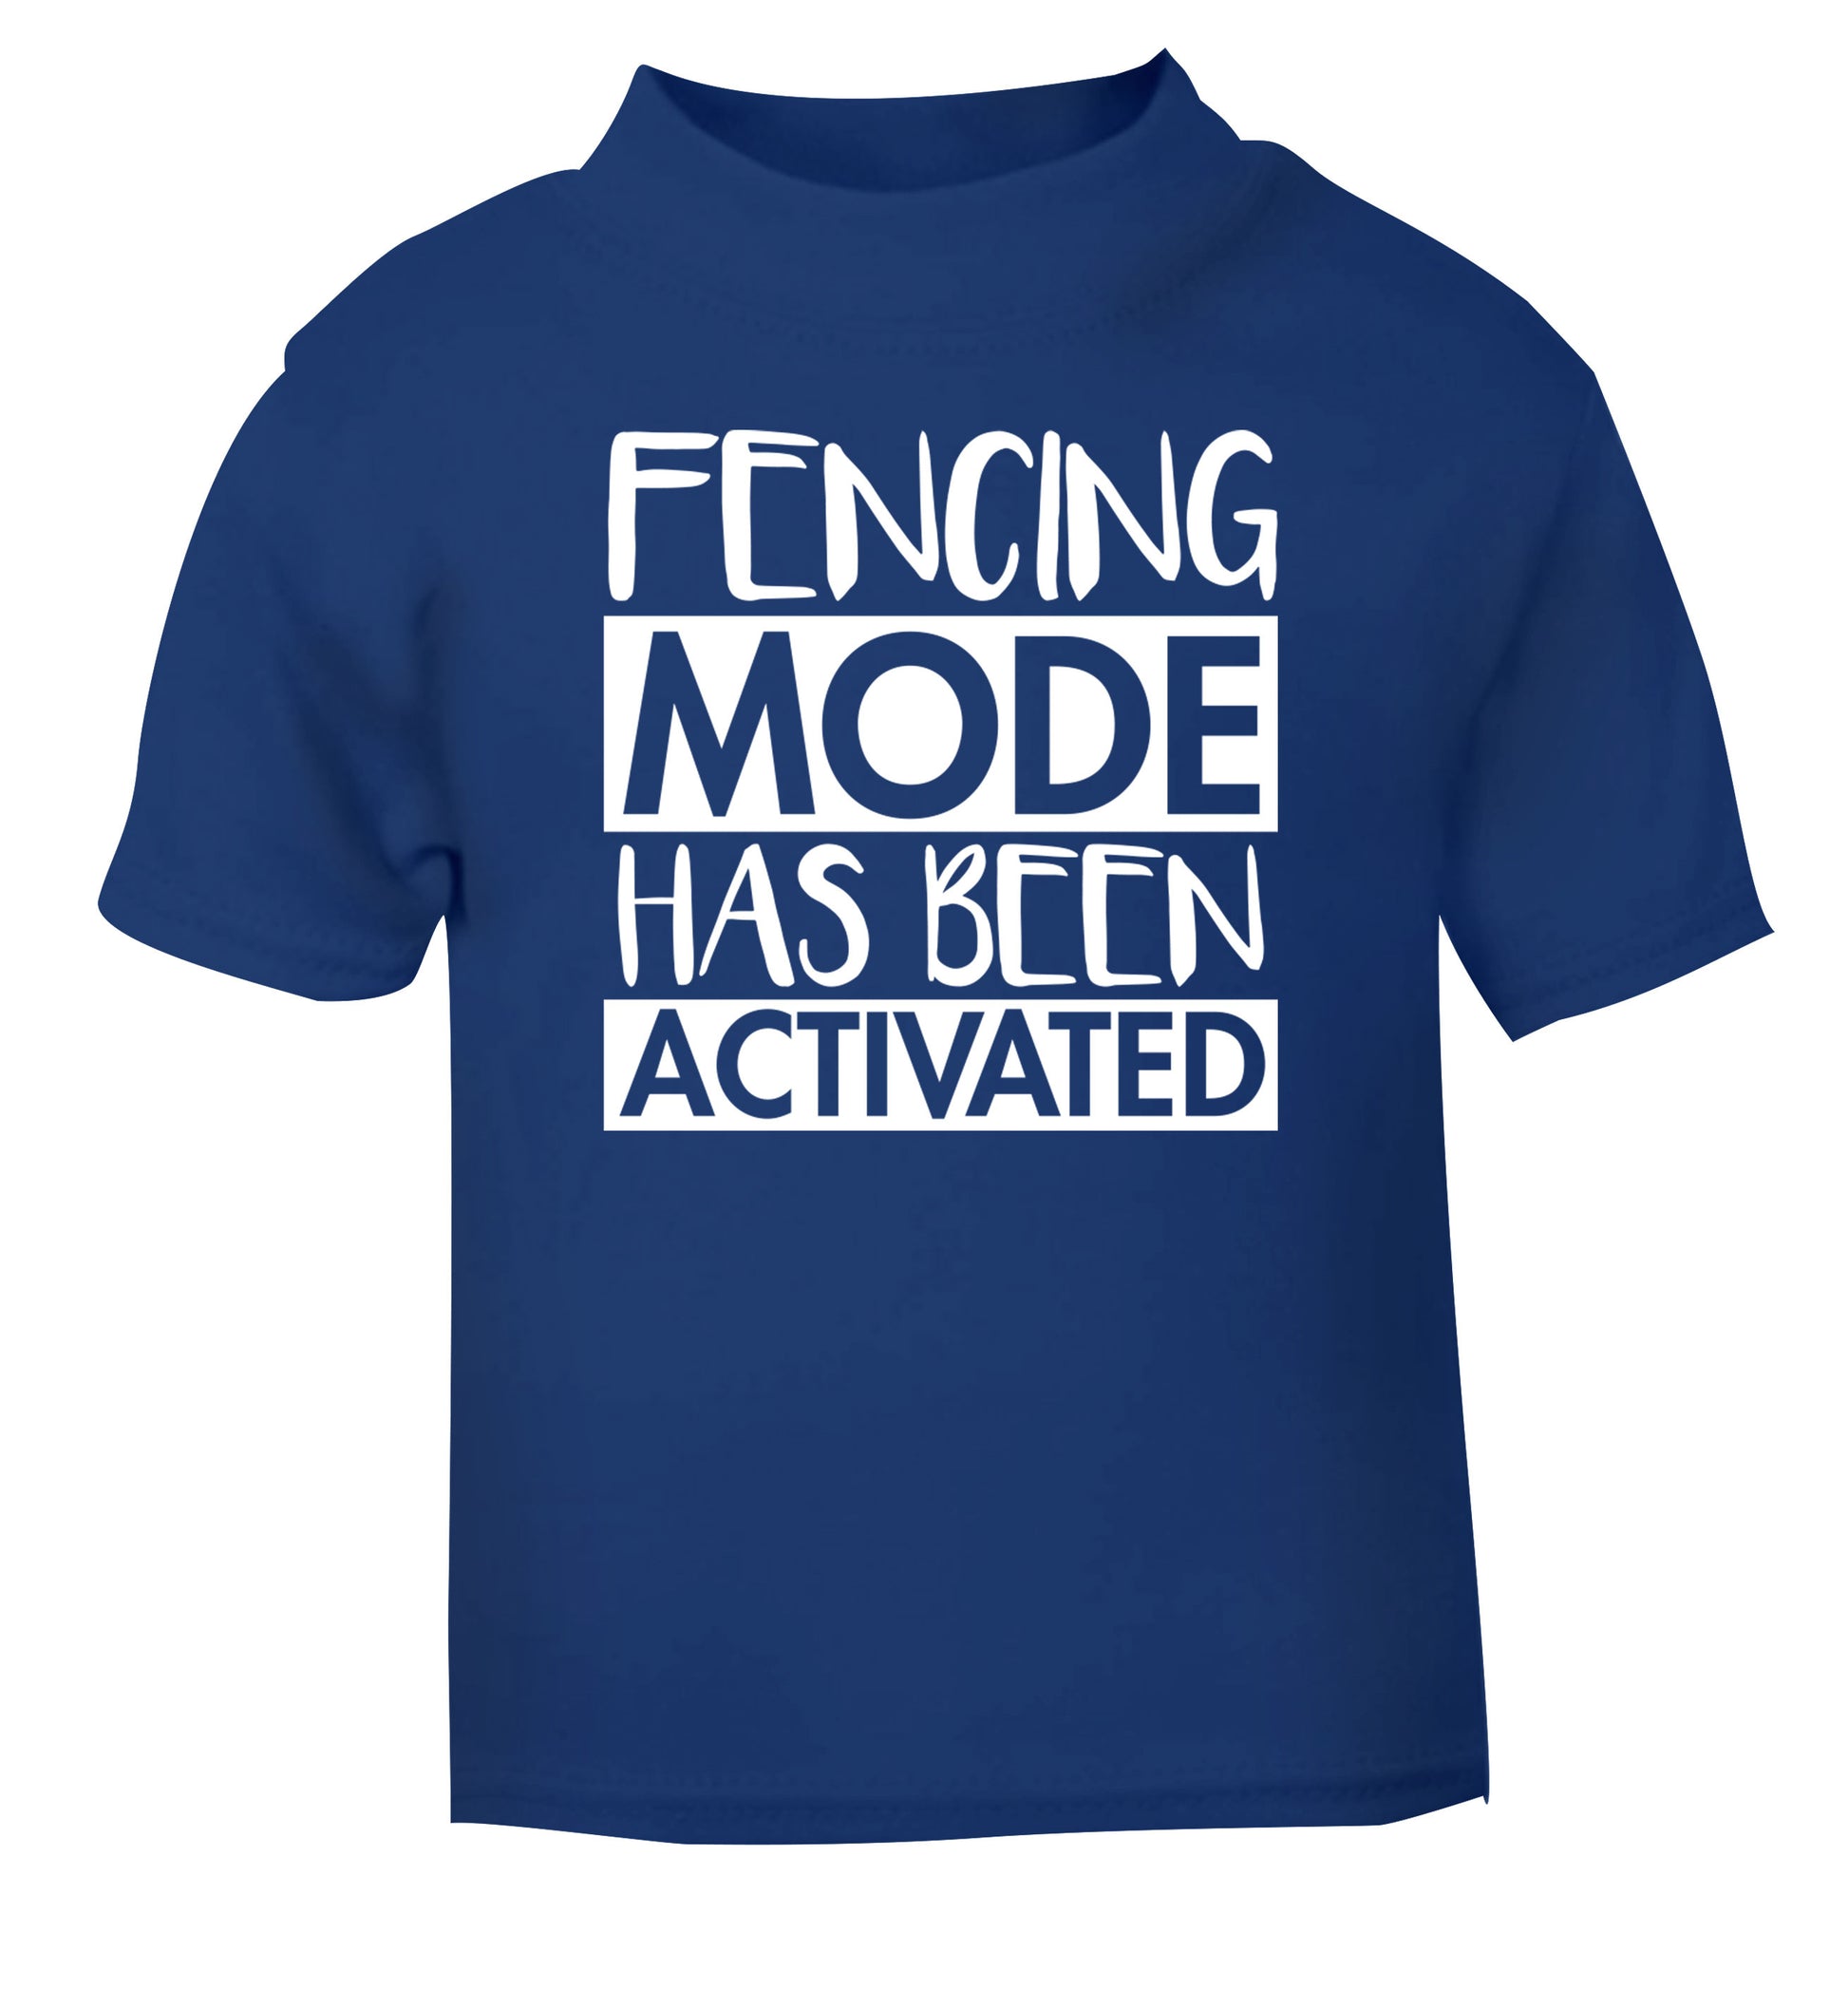 Fencing mode activated blue Baby Toddler Tshirt 2 Years